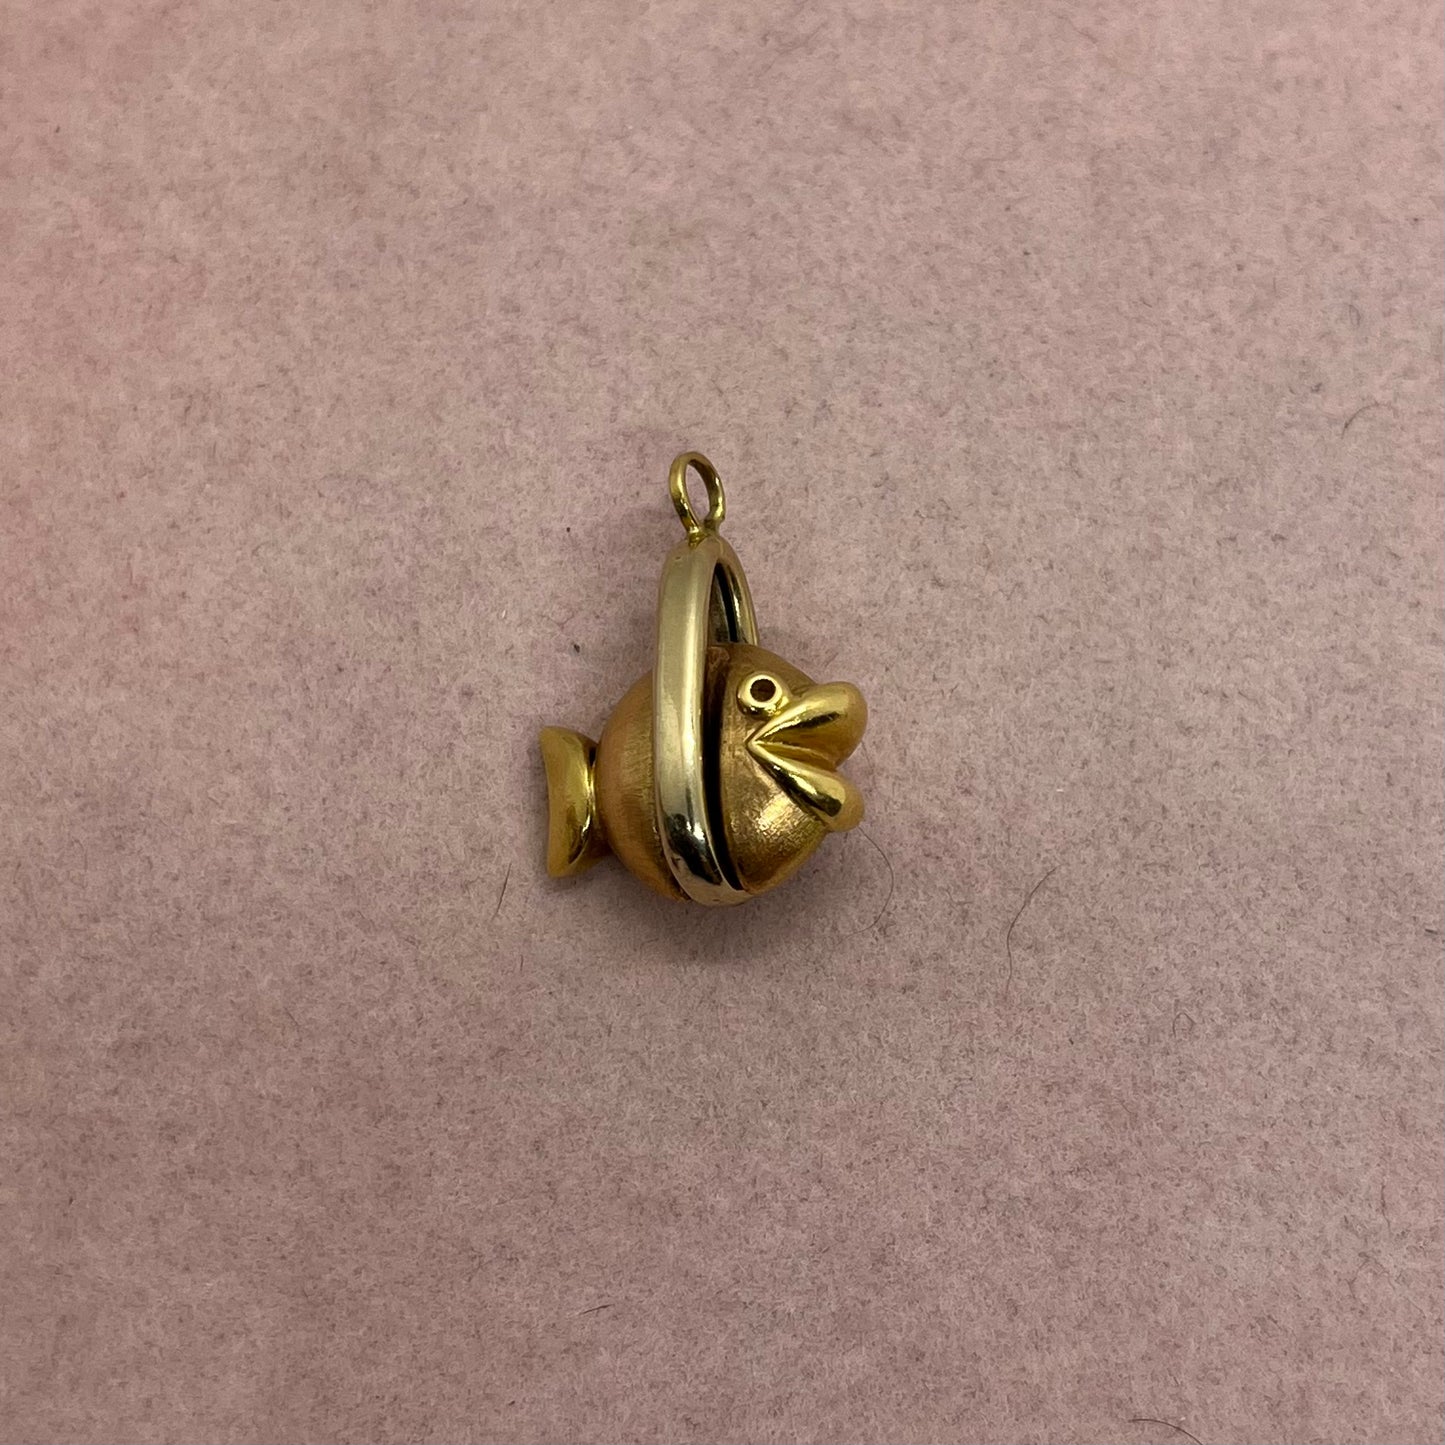 Moving Fish Pendant With Open Mouth (18k, Italy)